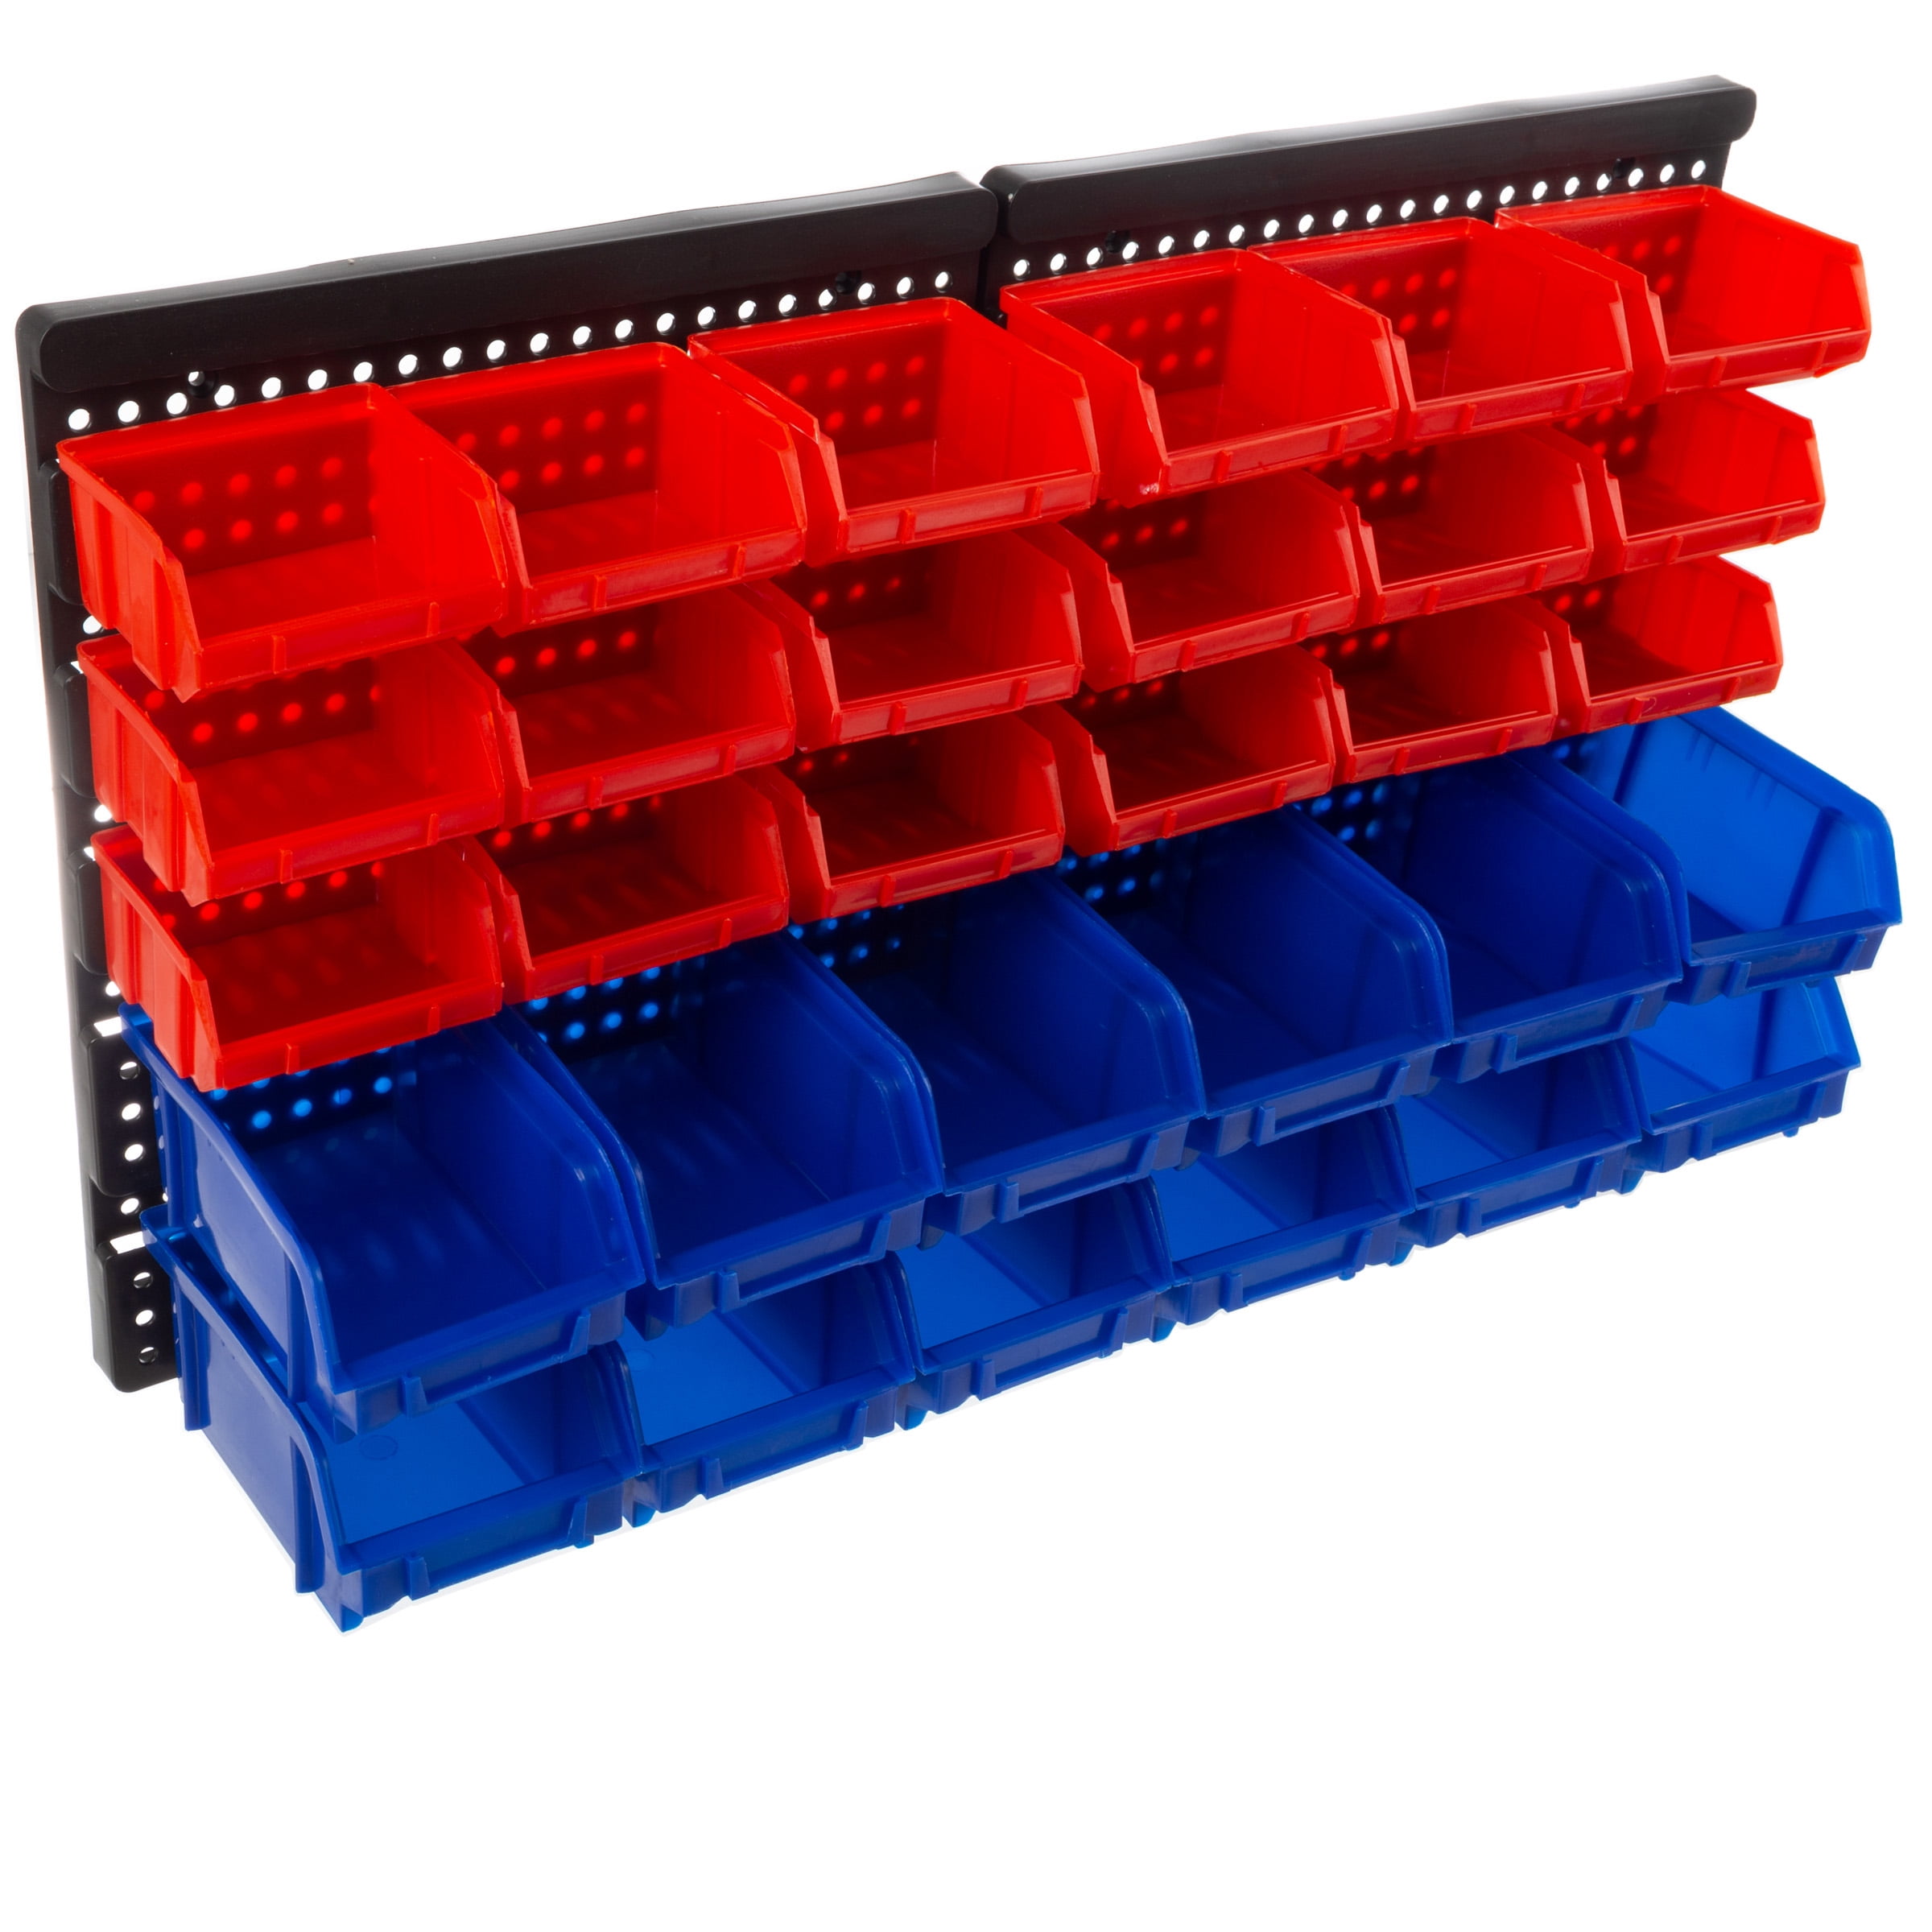 49-COMPARTMENT HARDWARE SMALL PARTS ORGANIZER 4 Containers w